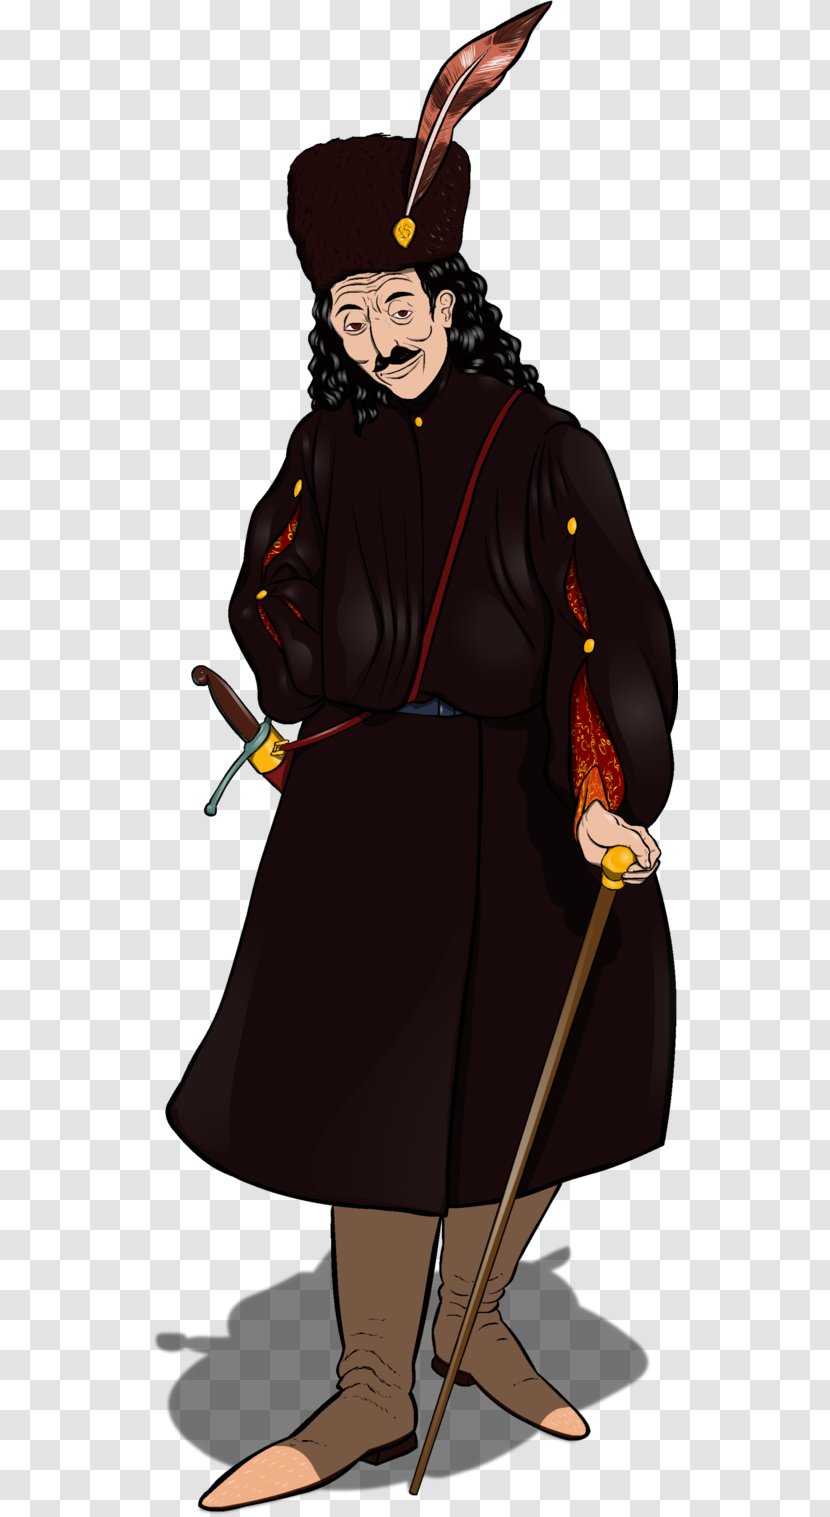 Costume Design Cartoon Character - Lord Mobile Transparent PNG